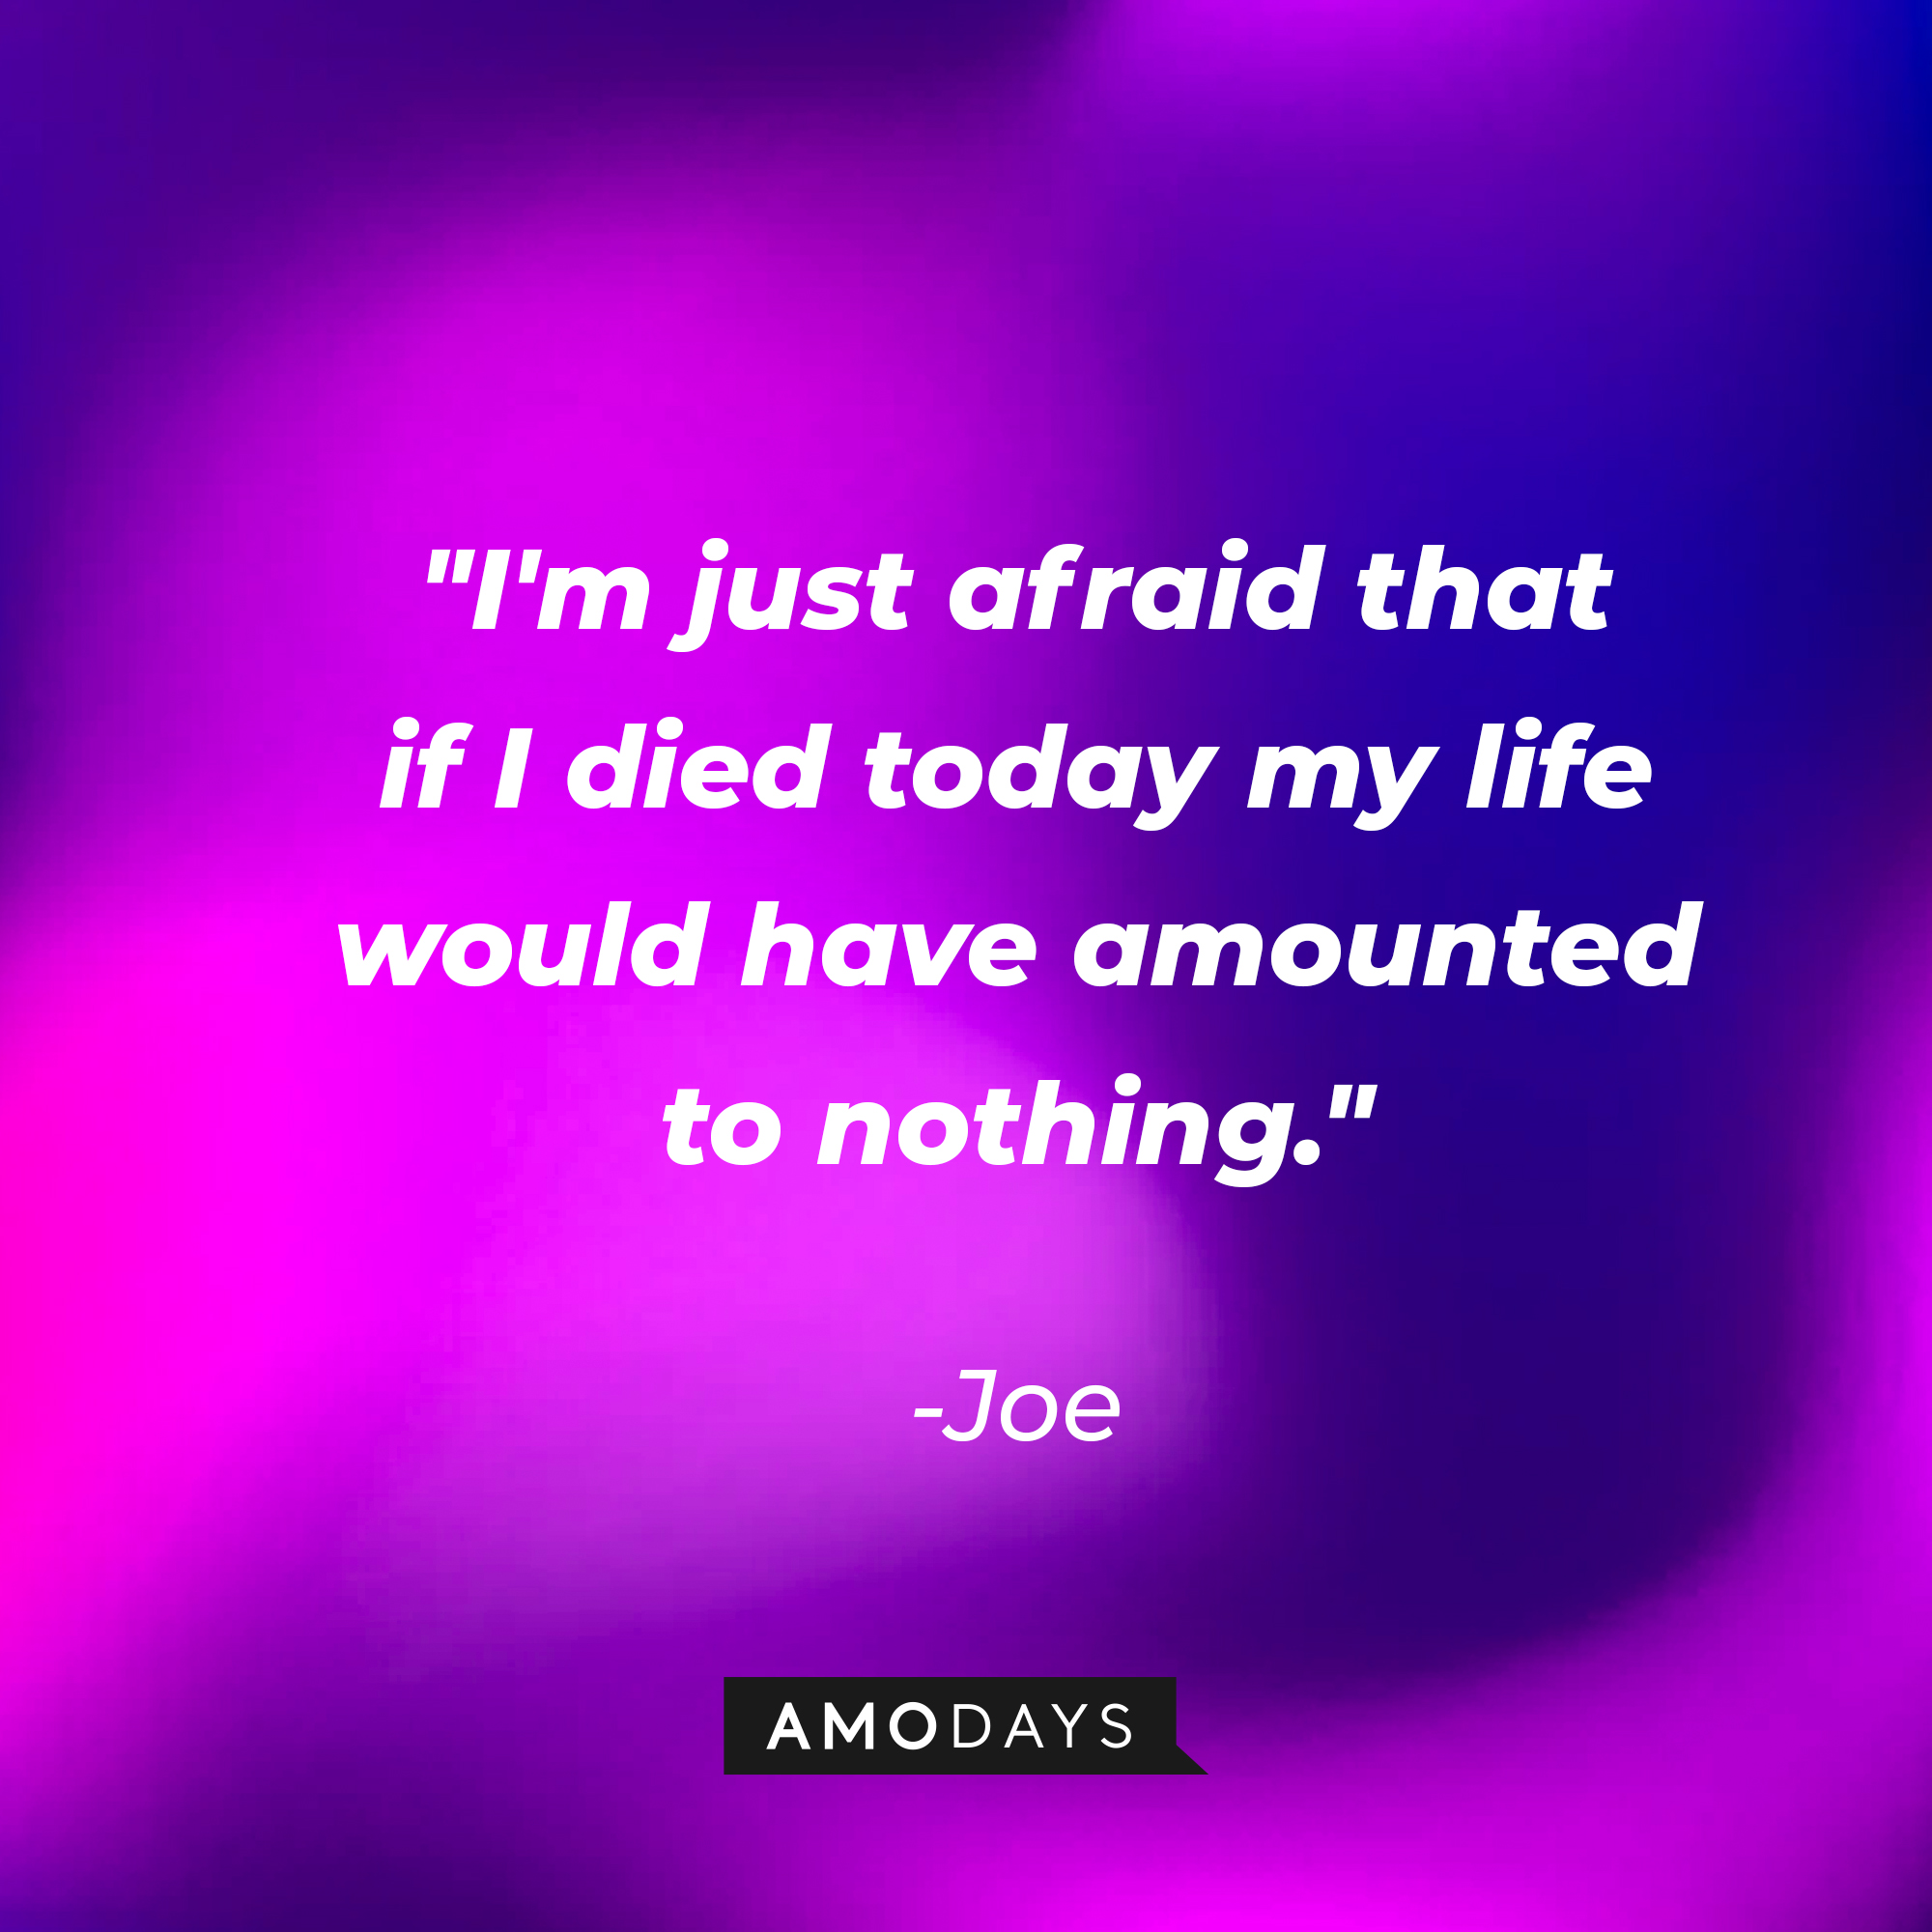 Joe's quote: "I'm just afraid that if I died today my life would have amounted to nothing." | Source: youtube.com/pixar